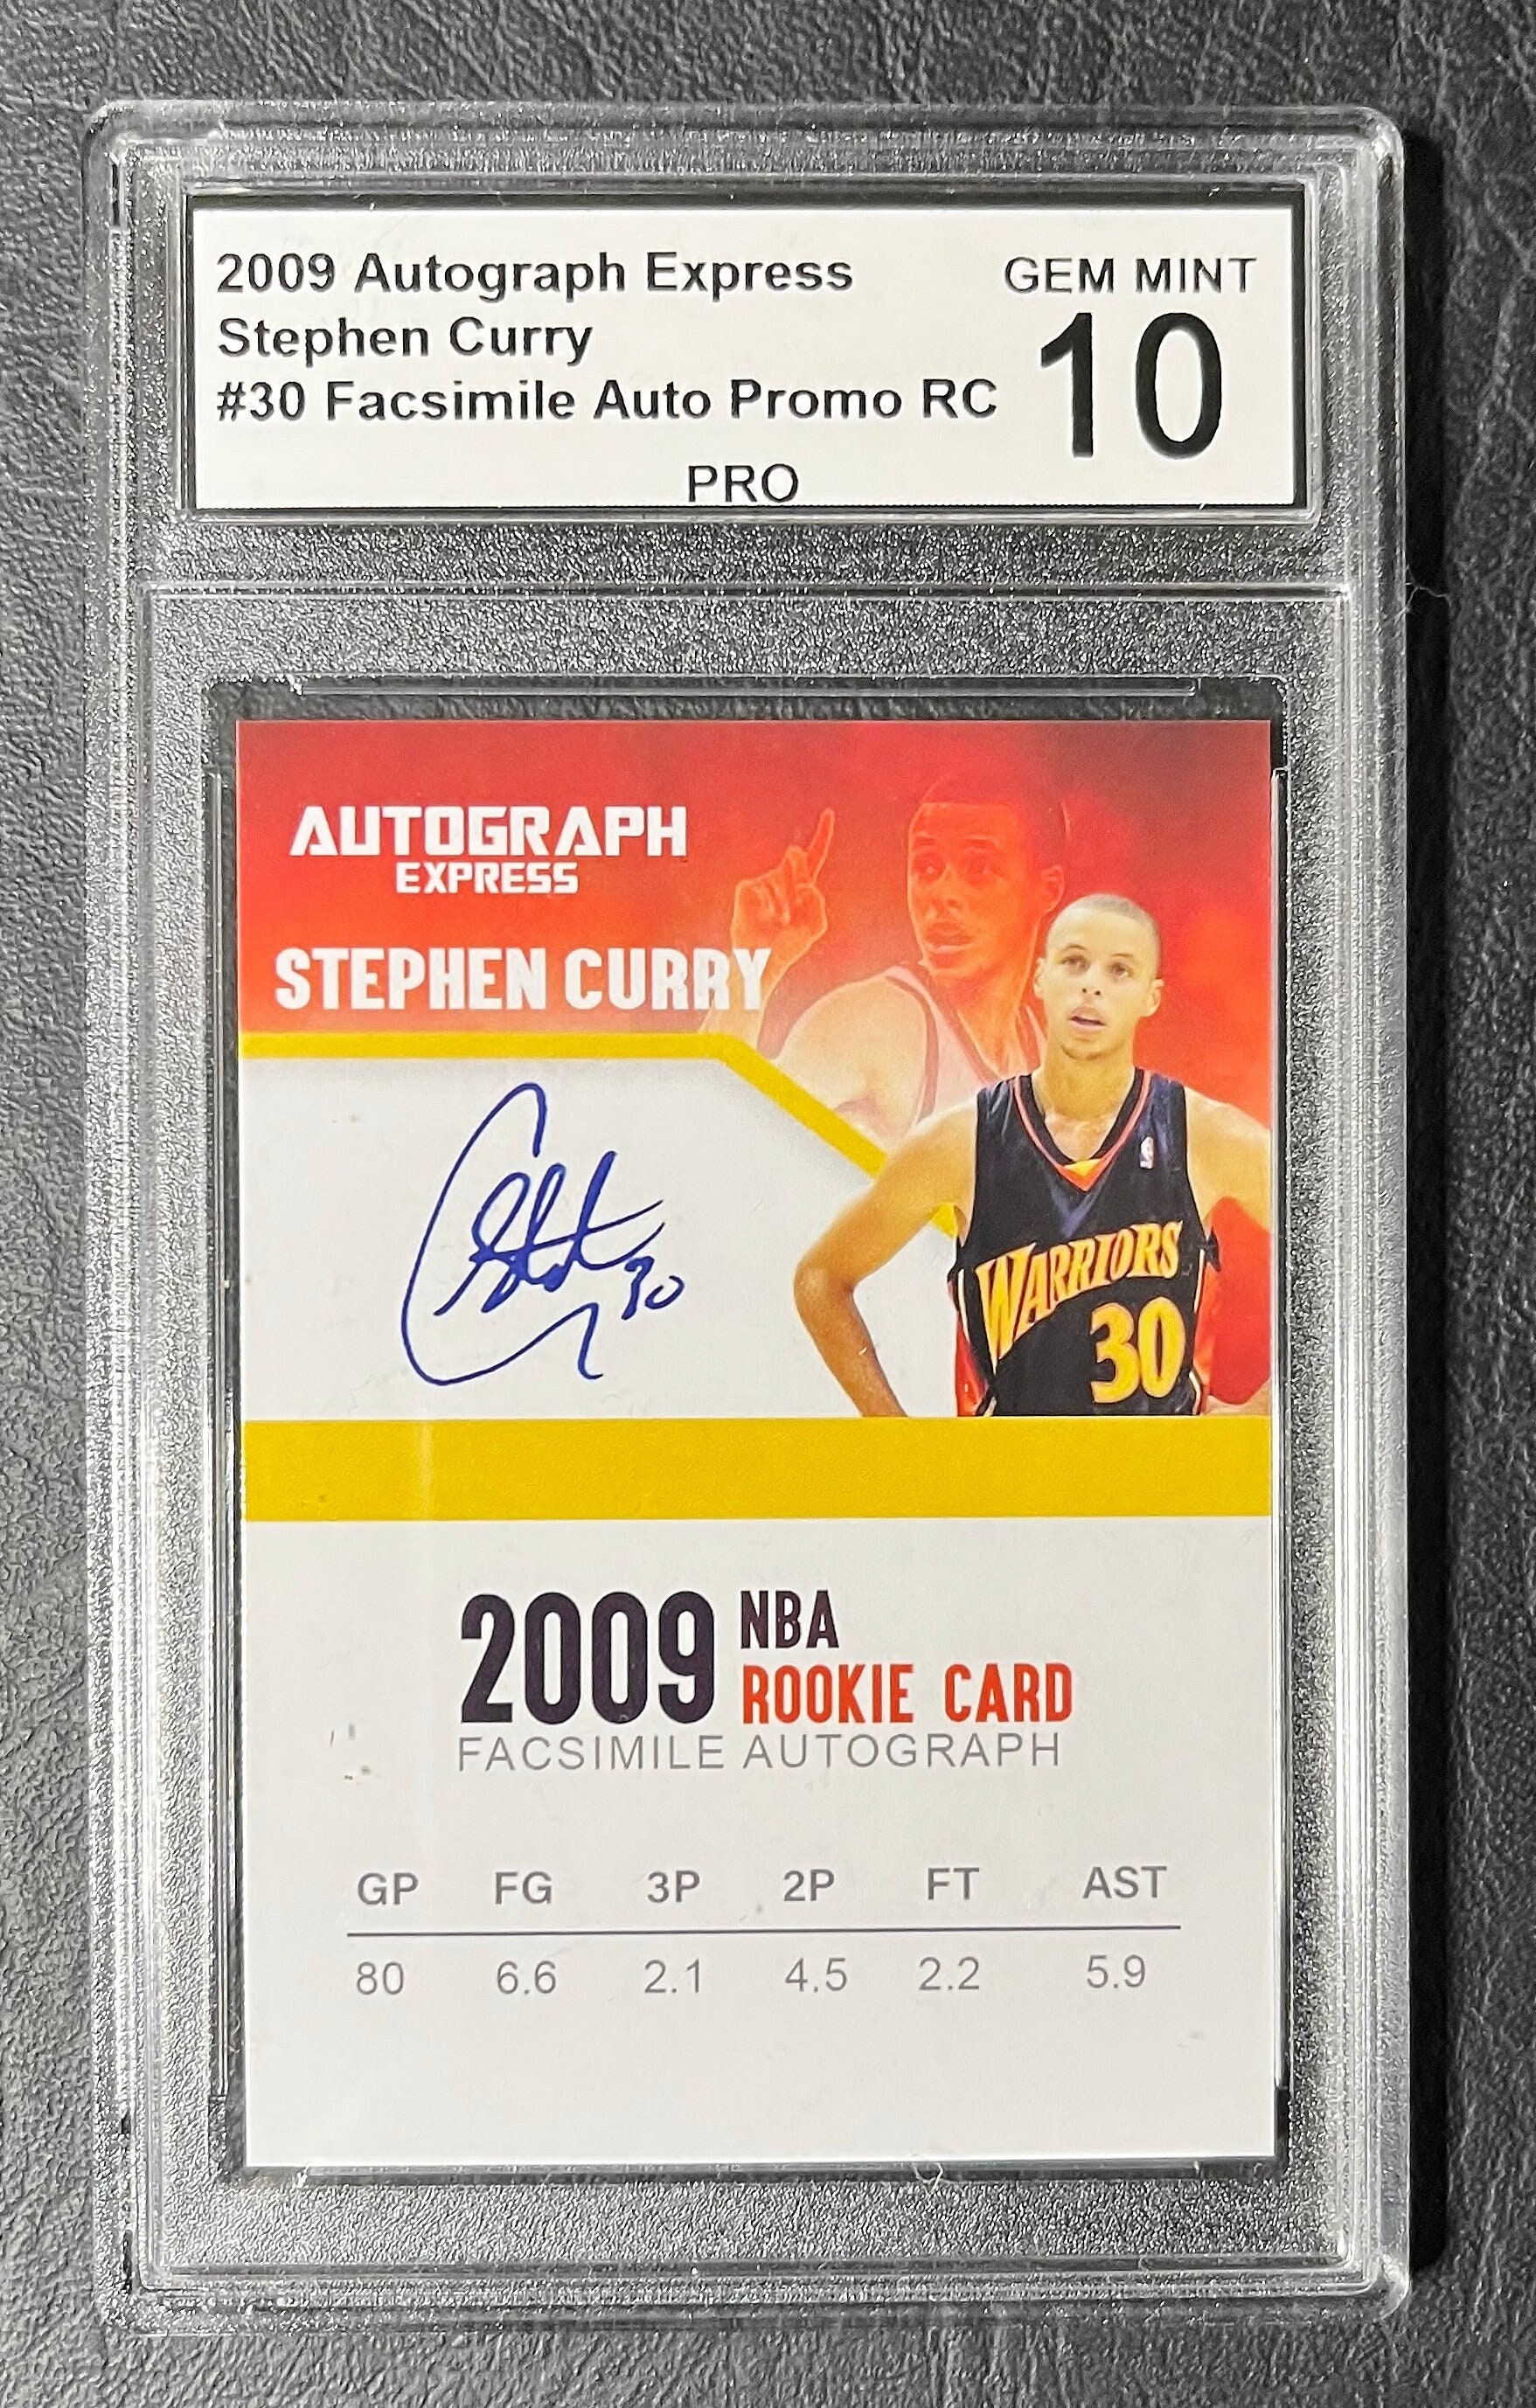 Autographed Stephen Curry Photo - LASER ENGRAVED PLATE Framed 8x10